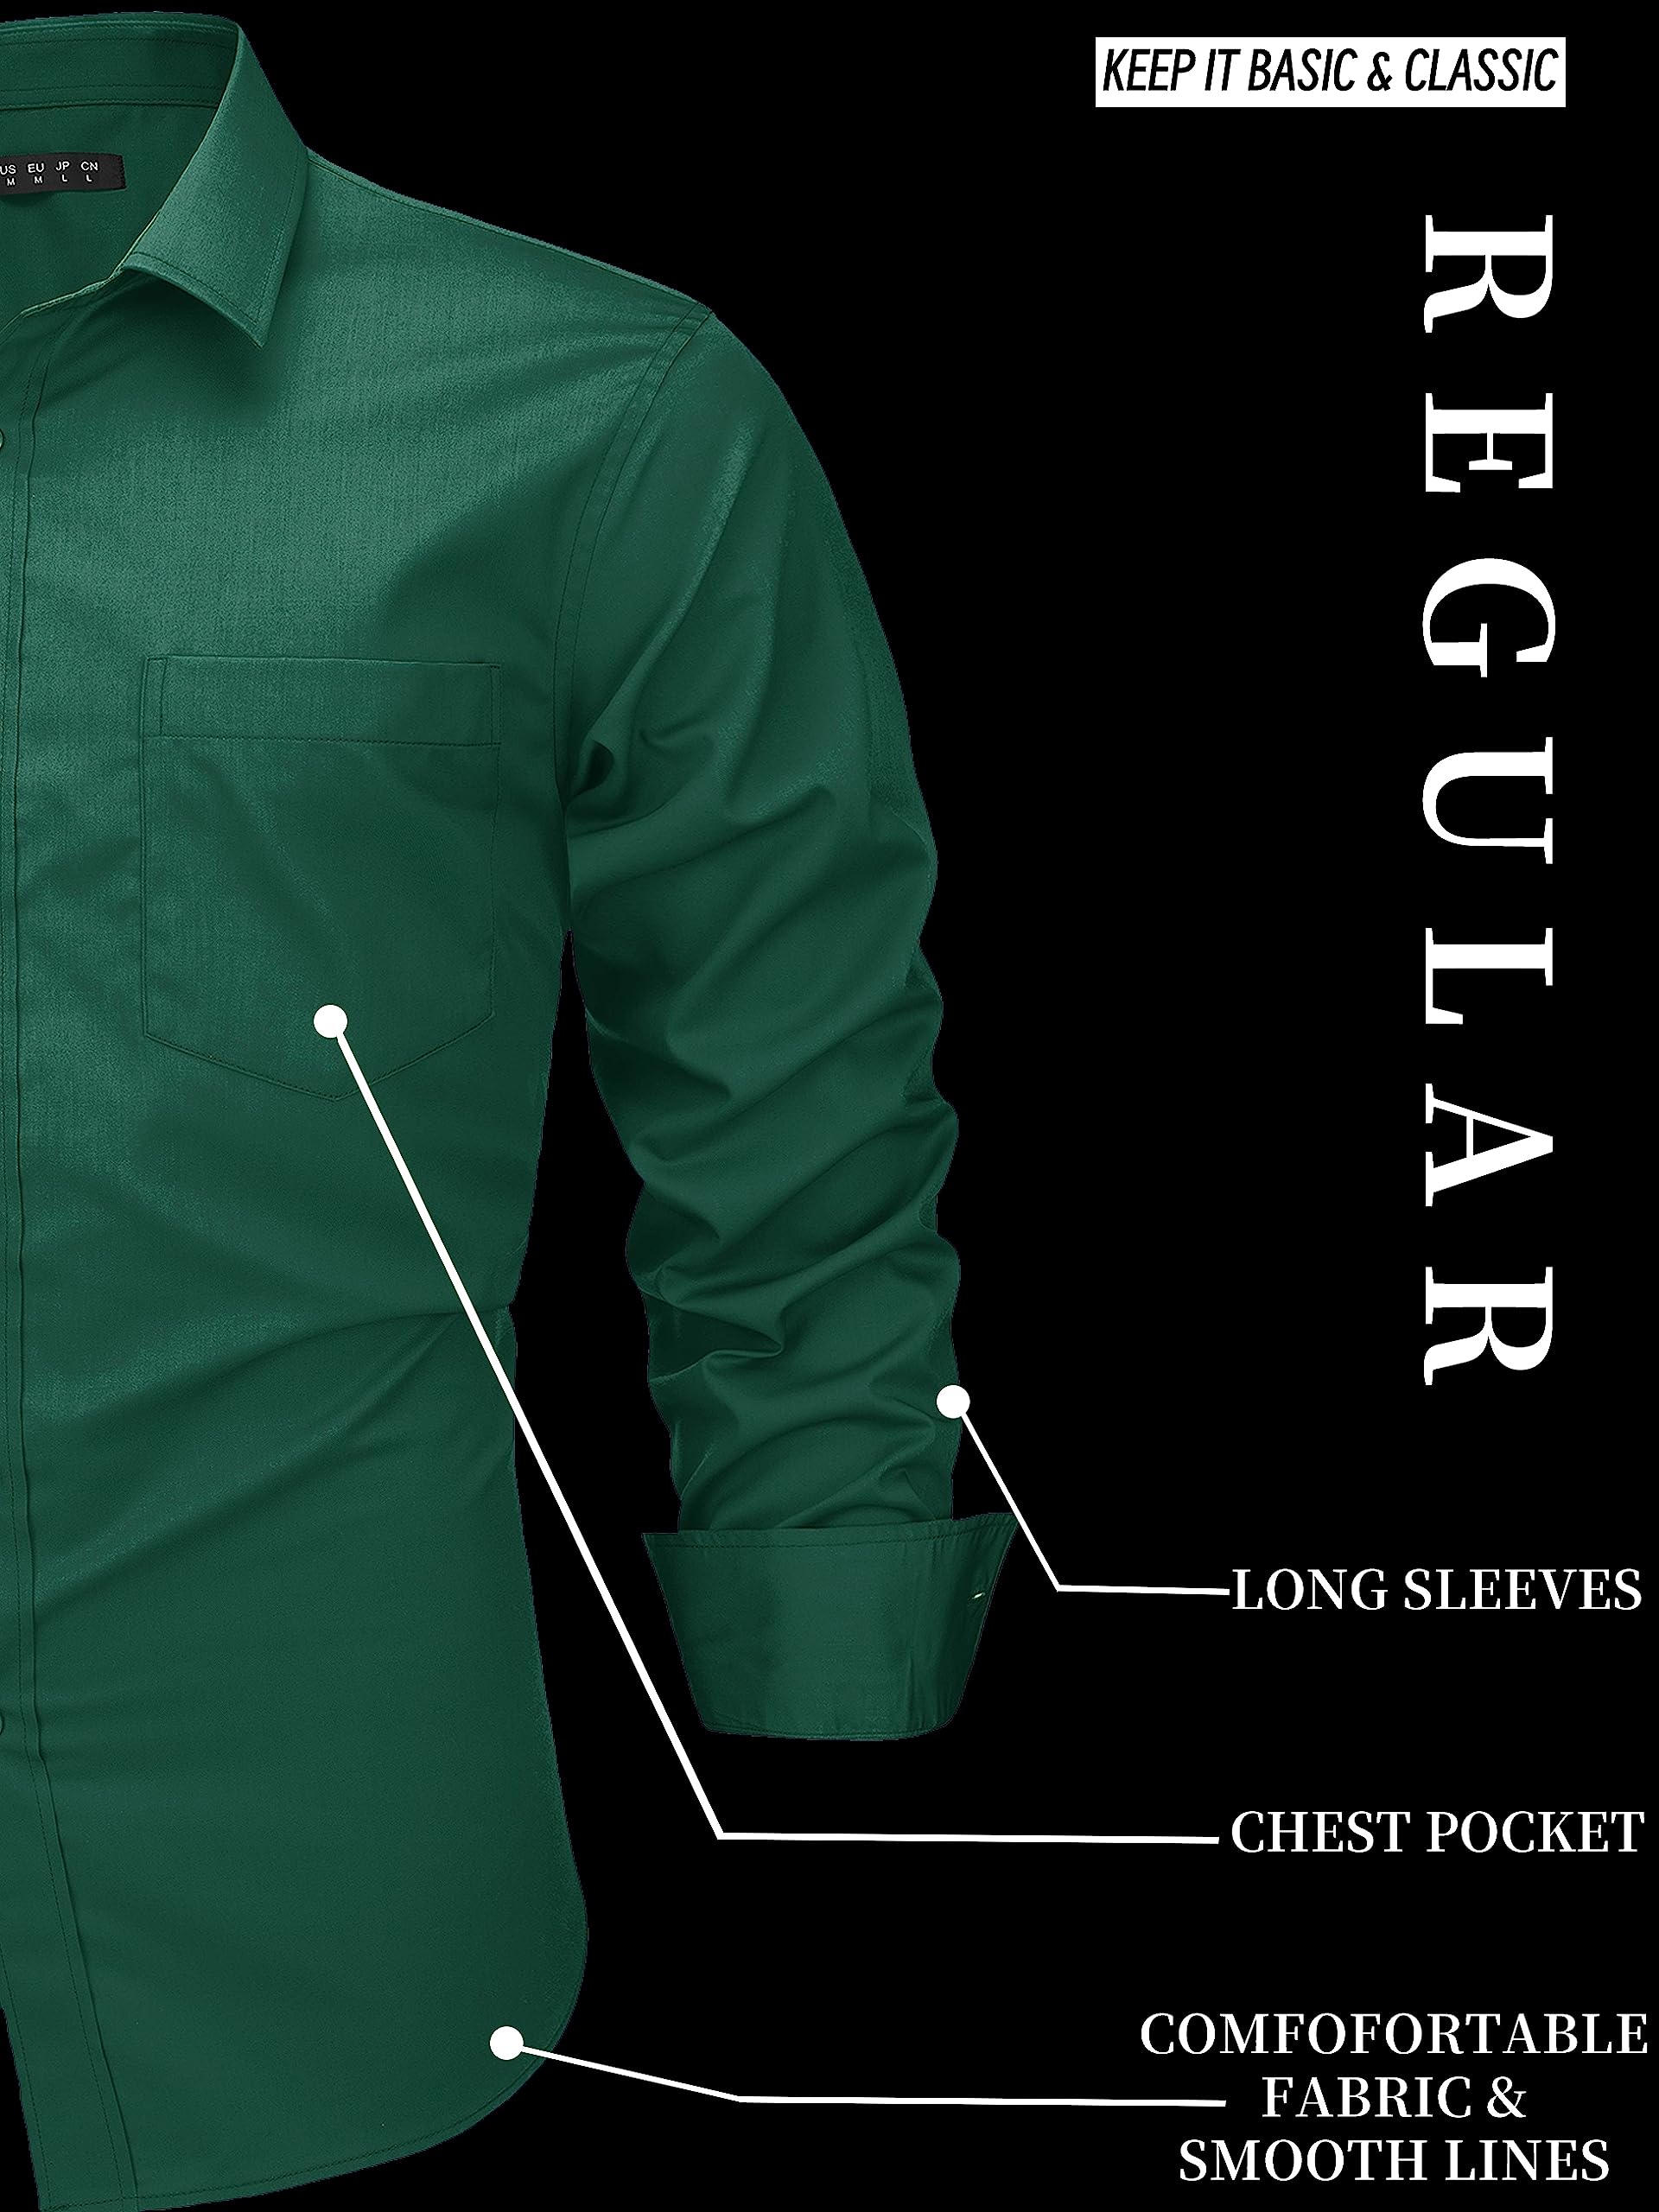 MAGCOMSEN Men's Dress Shirts Long Sleeve Button Up Shirt with Pocket Fitted Formal Business Wear Solid Cotton Fashion Shirts Dark Green, L